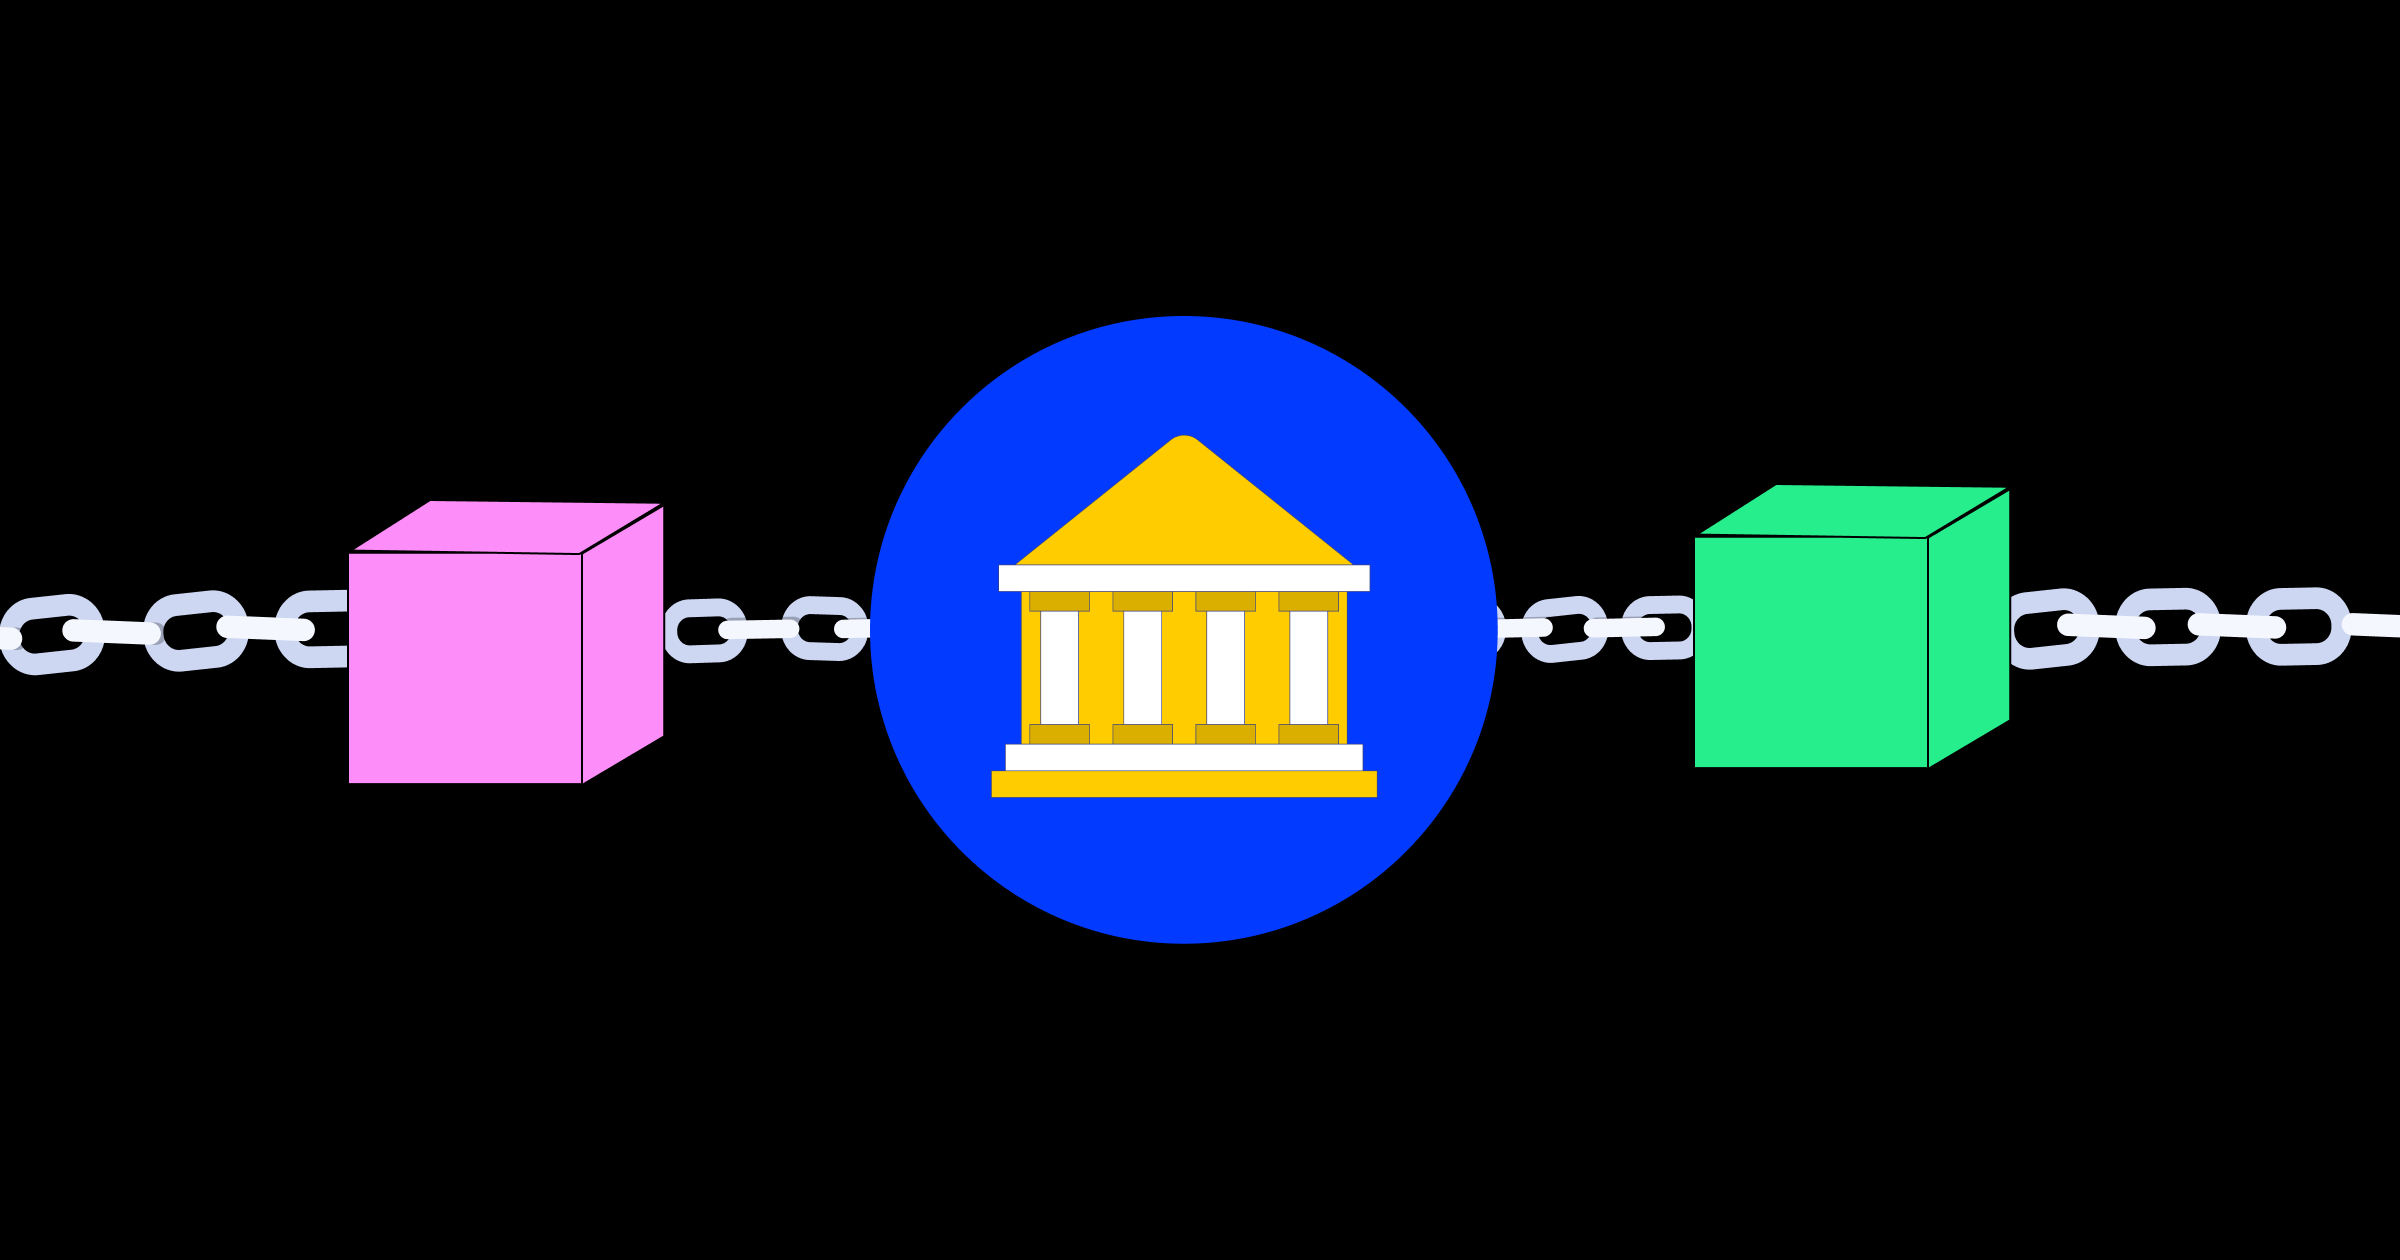 Blockchain in Banking Sector: Impact, Adoption, and Benefits